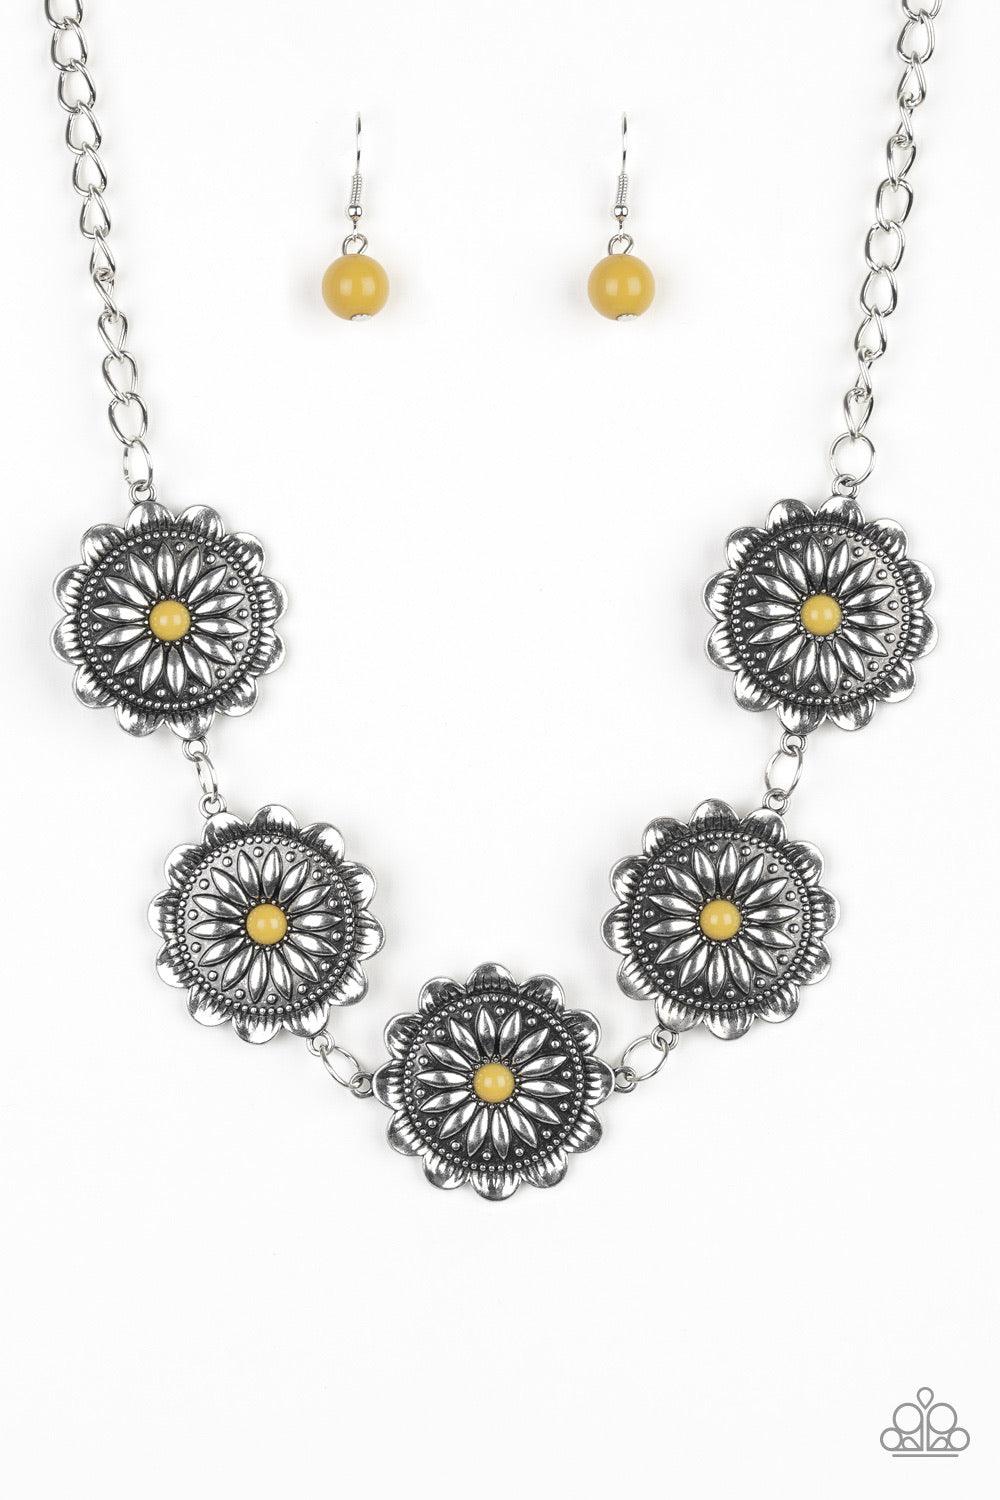 Me-Dillions, Myself, and I ~Yellow - Beautifully Blinged